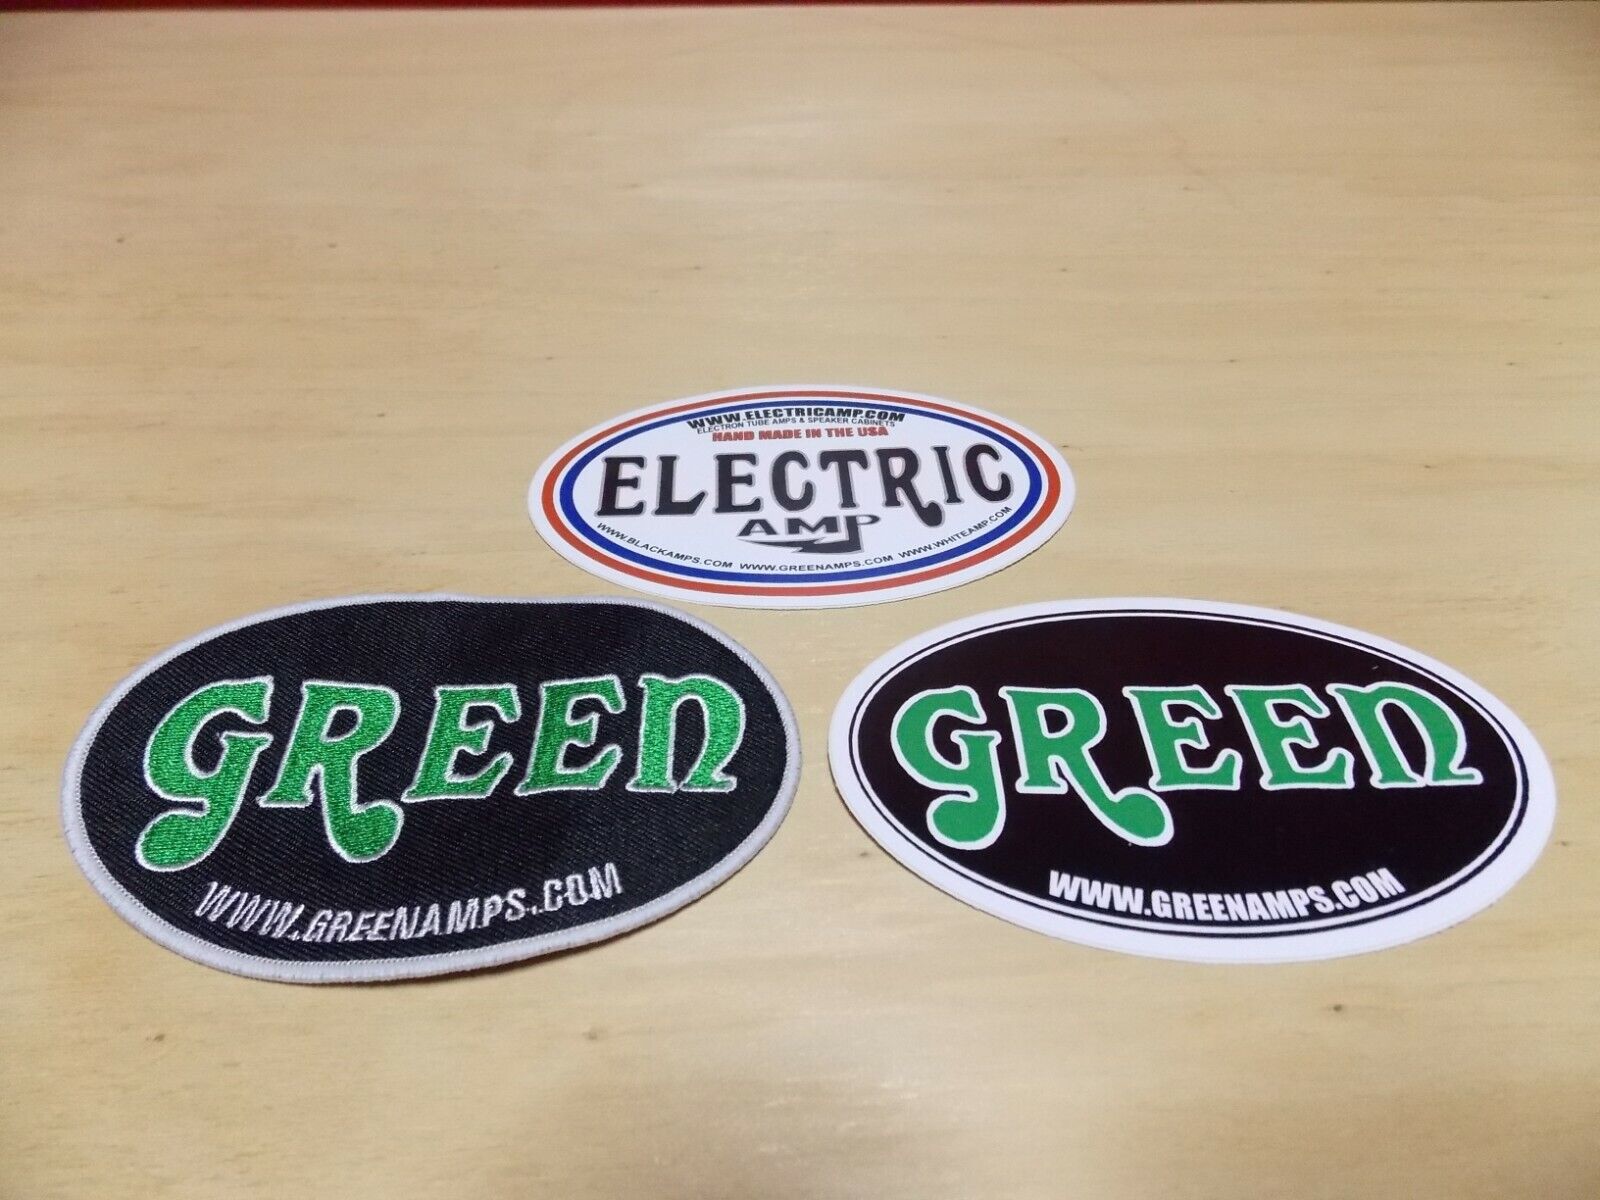 GREEN Amp ELECTRIC AMP USA  MERCHANDISE PACK OFFICIAL TM LOGO ITEMS